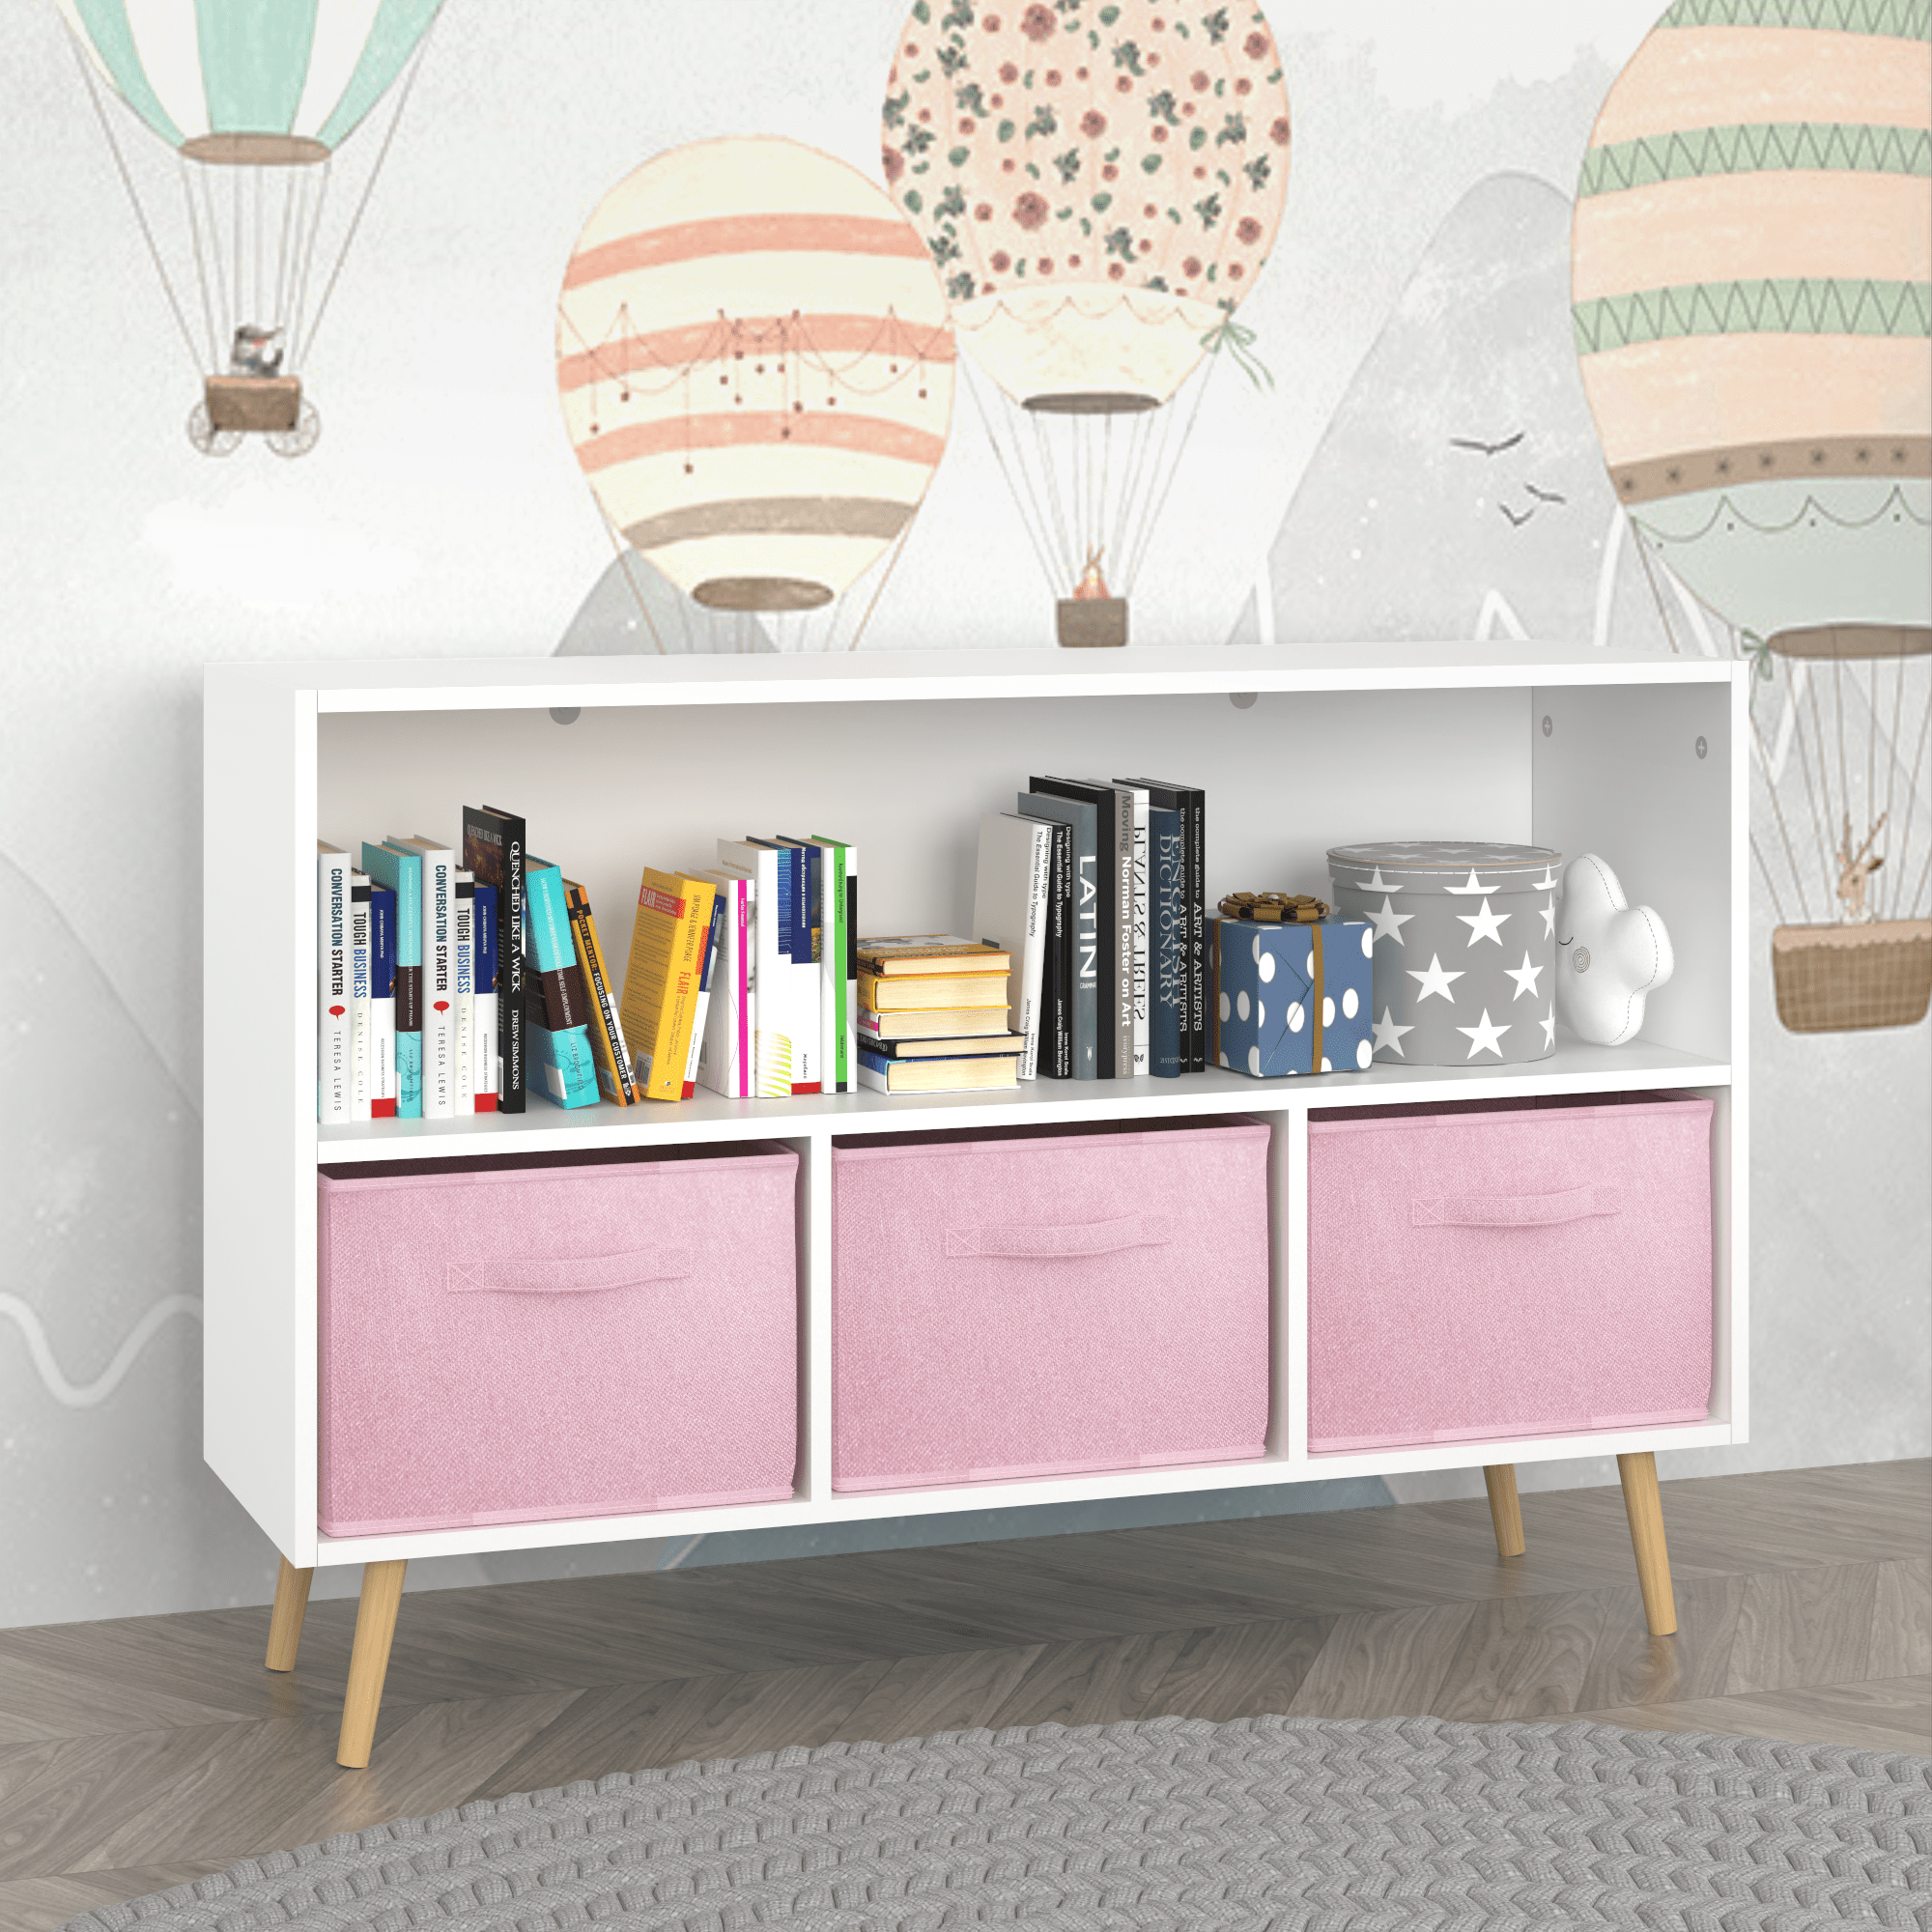 Kids bookcase with Collapsible Fabric Drawers, Children's Book Display, Toy Storage Cabinet Organizer, White/Pink